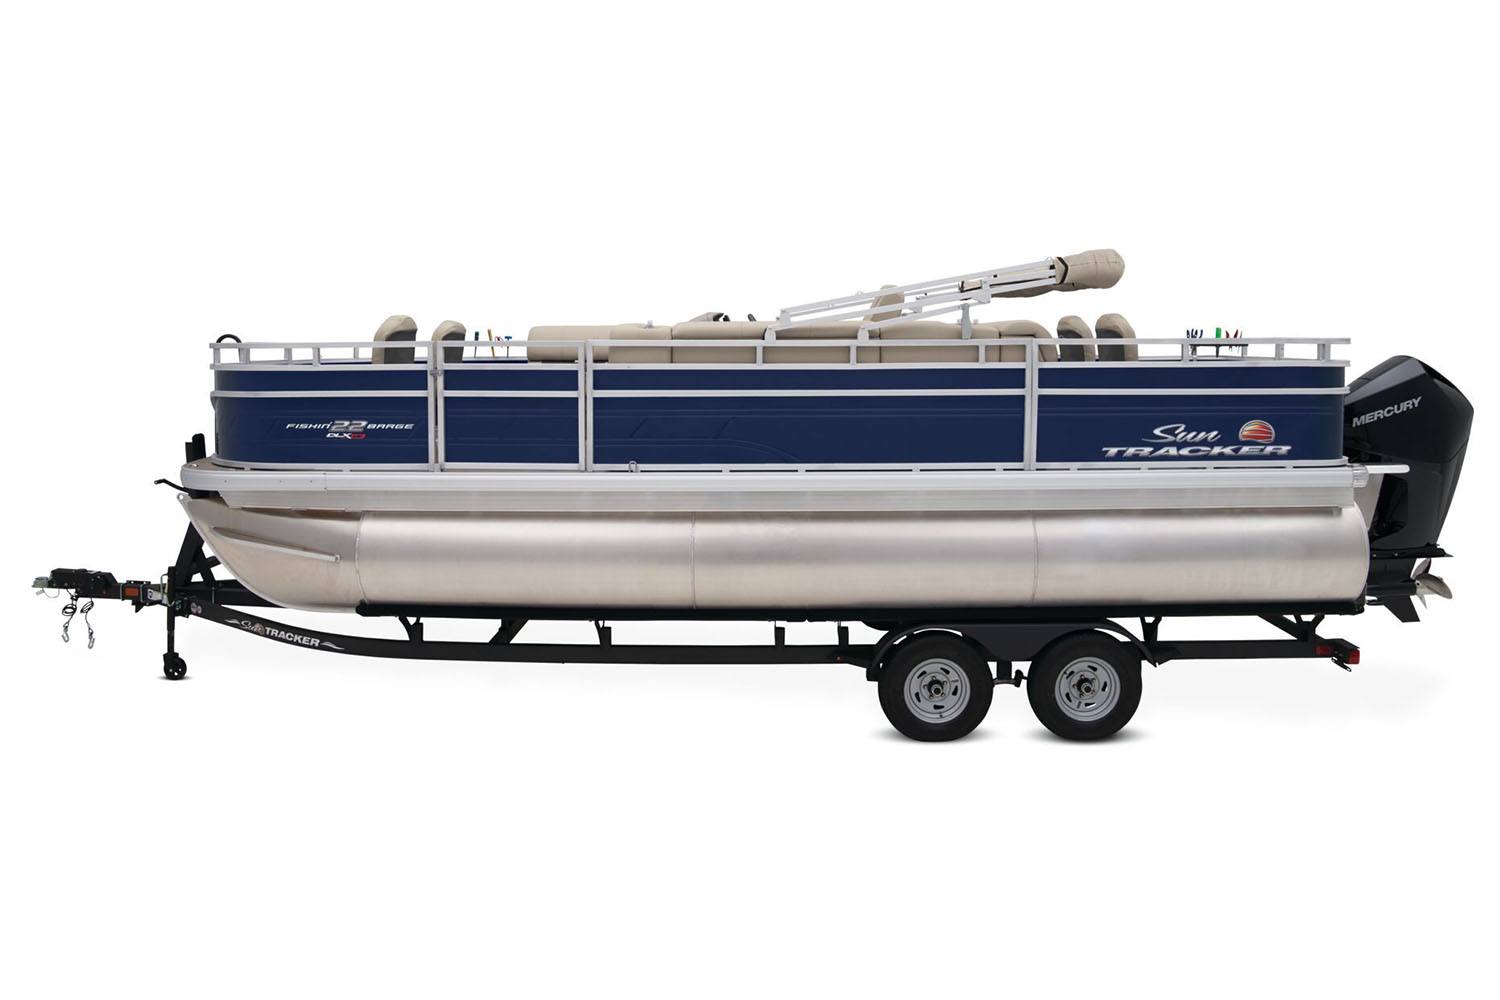 2024 Sun Tracker Fishin' Barge 22 XP3 in Knoxville, Tennessee